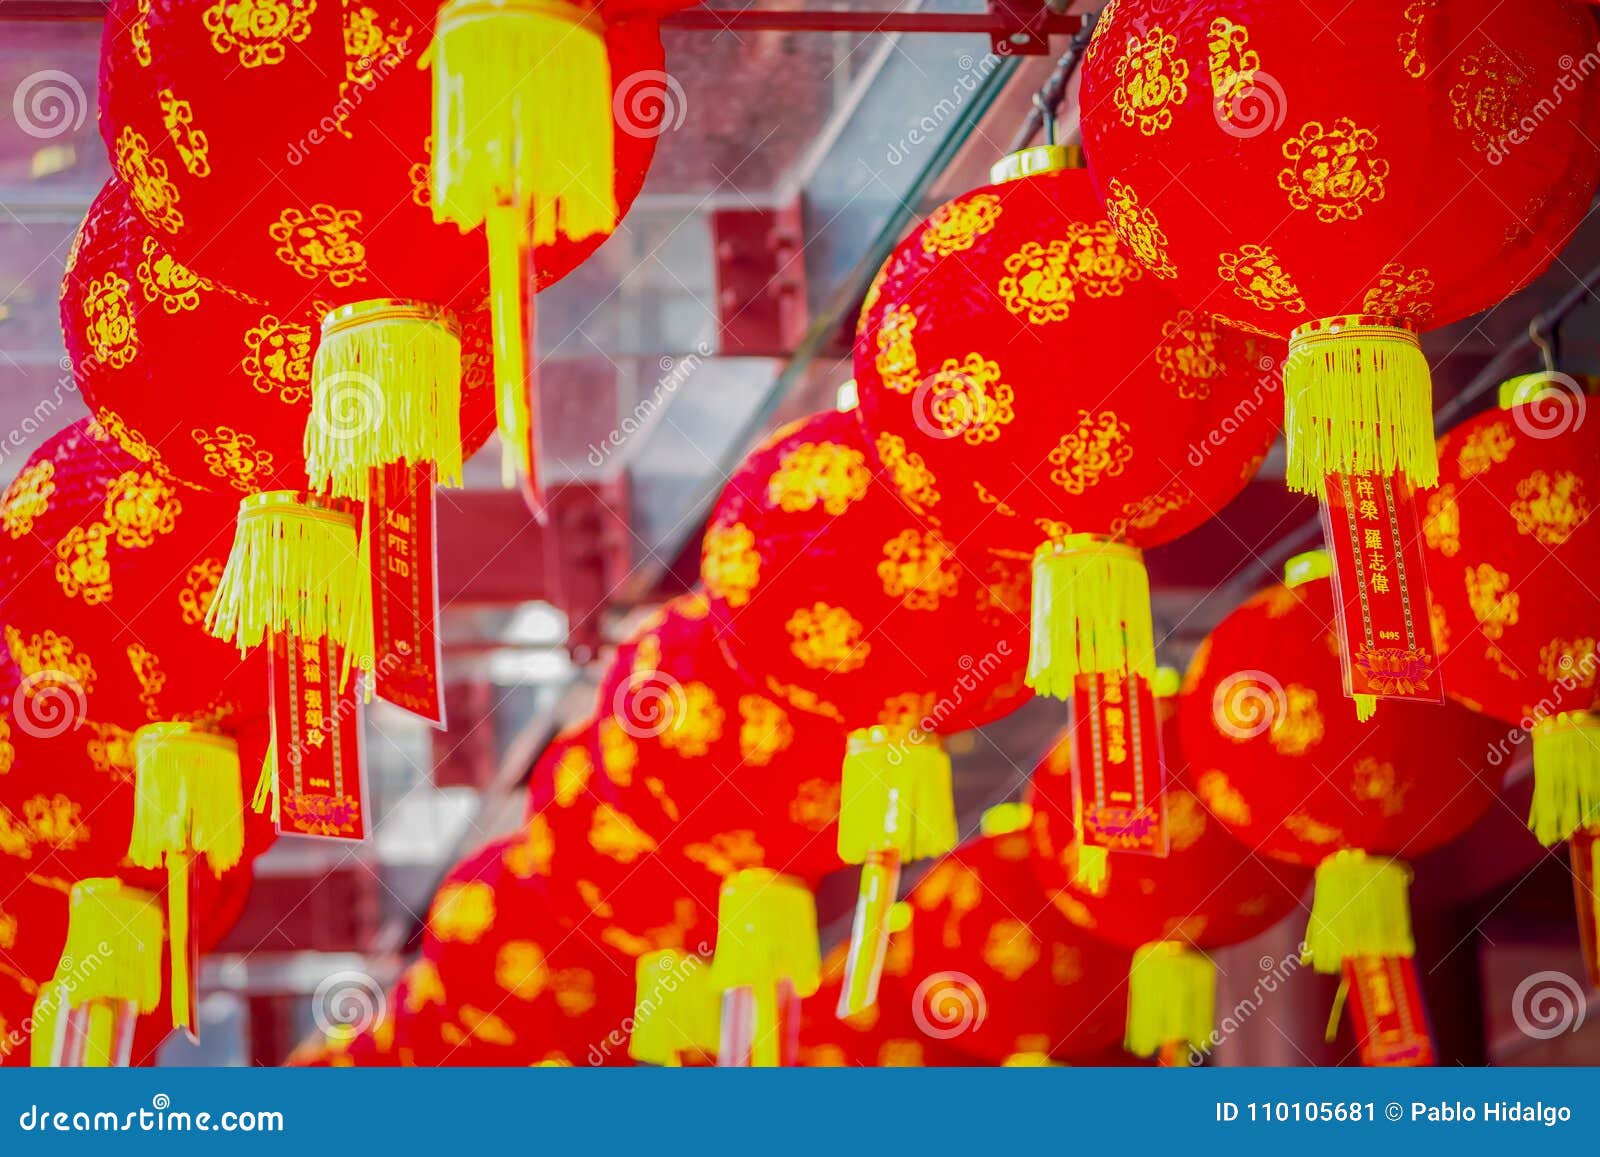 decorative lanterns scattered around chinatown, singapore. china`s new year. year of the dog. photos taken in china town